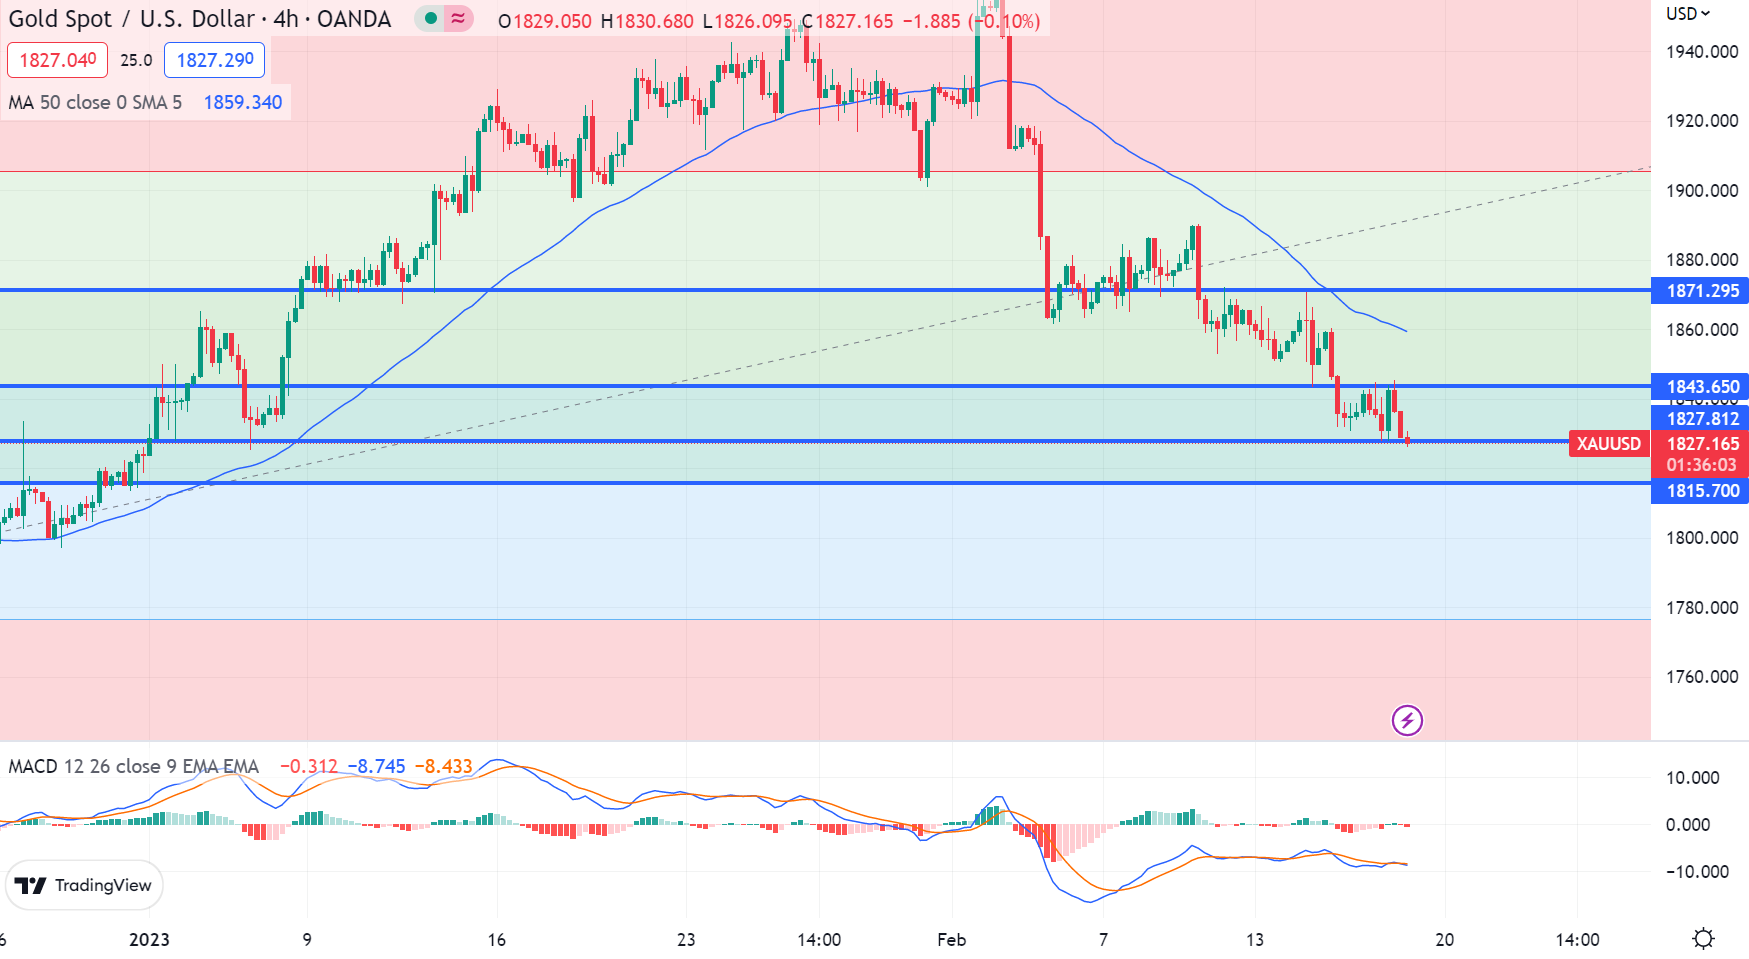 XAU/USD Bears Remain Resilient in Gold Price Forecast, Targeting $1,825